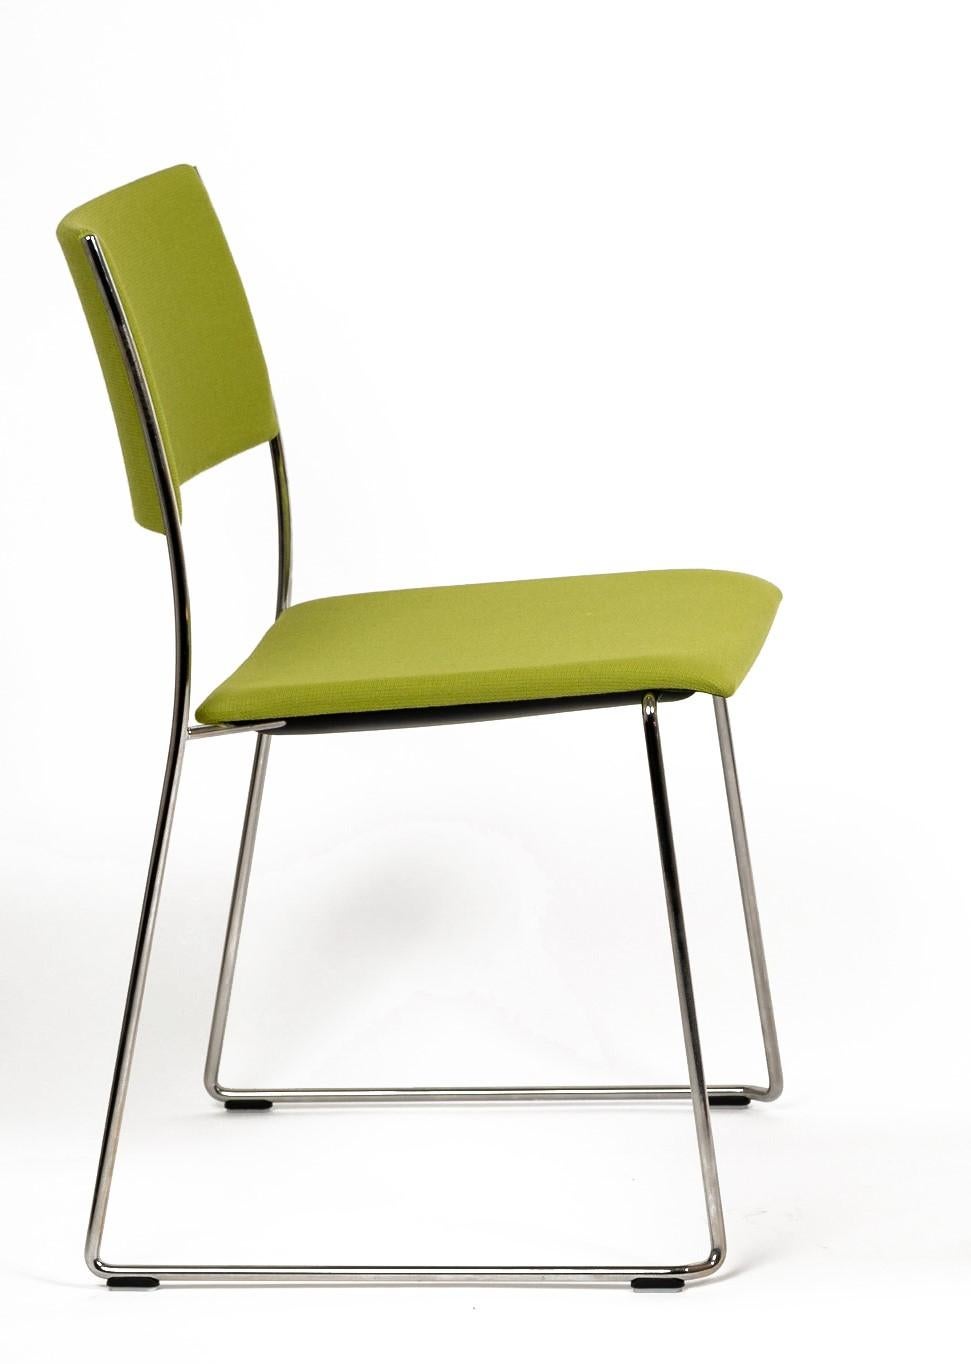 The ultra-slim Tila is a clever, filigree, and innovative multipurpose stackable chair, with a sled frame and outstanding stackability up to 30 chairs. It is an optimal solution for interior flexibility.

- Upholstered back in seat
- Contract